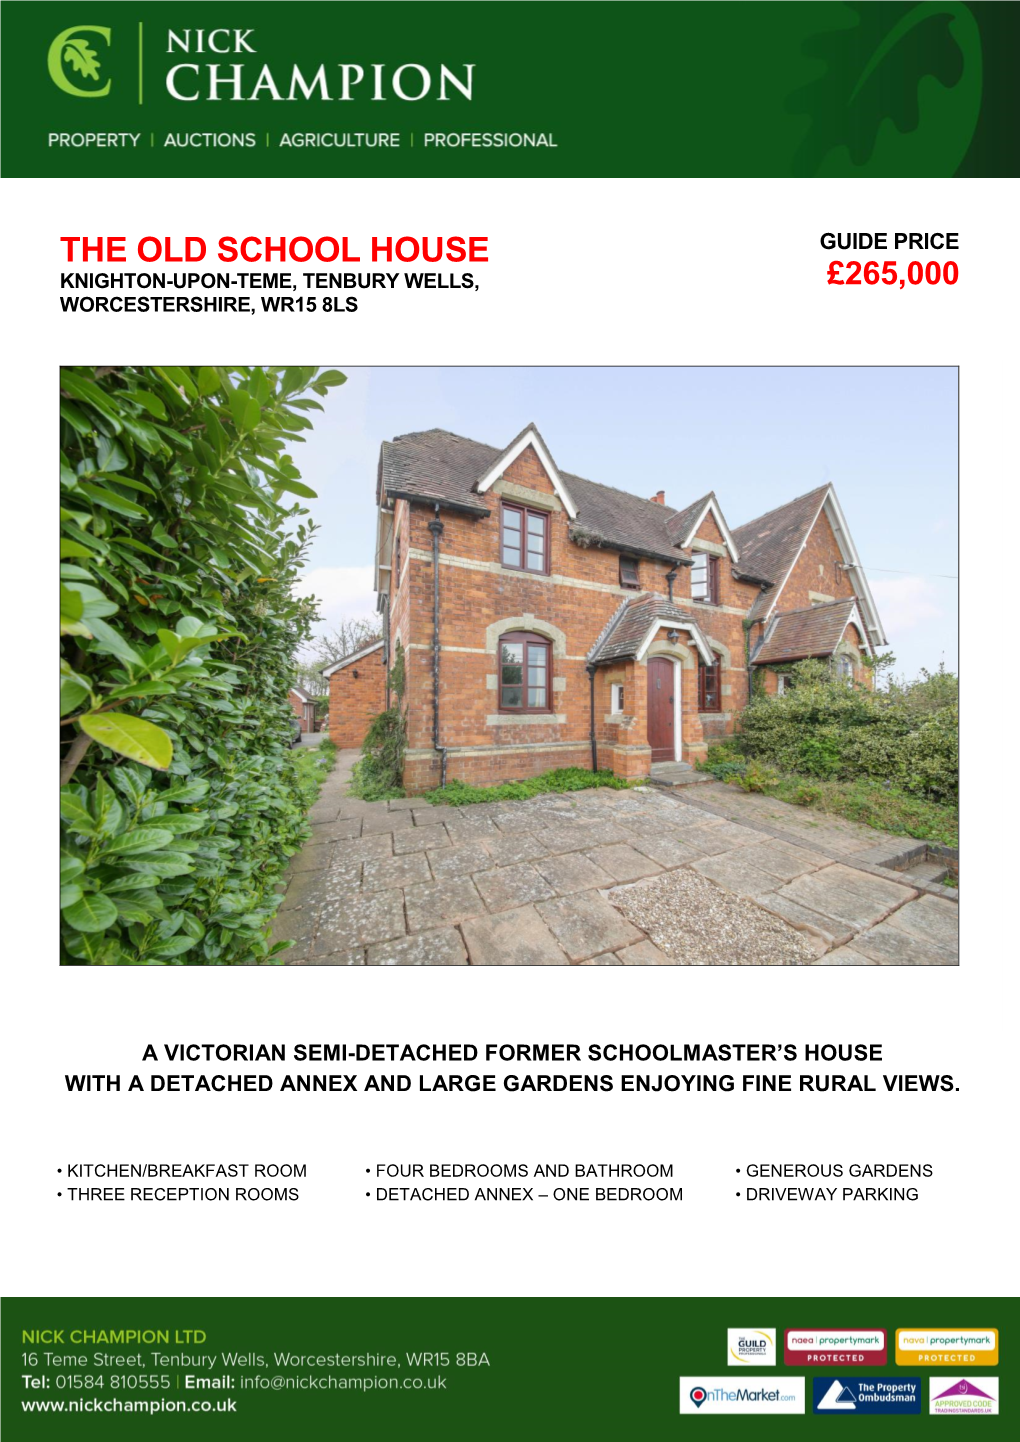 The Old School House Guide Price Knighton-Upon-Teme, Tenbury Wells, £265,000 Worcestershire, Wr15 8Ls